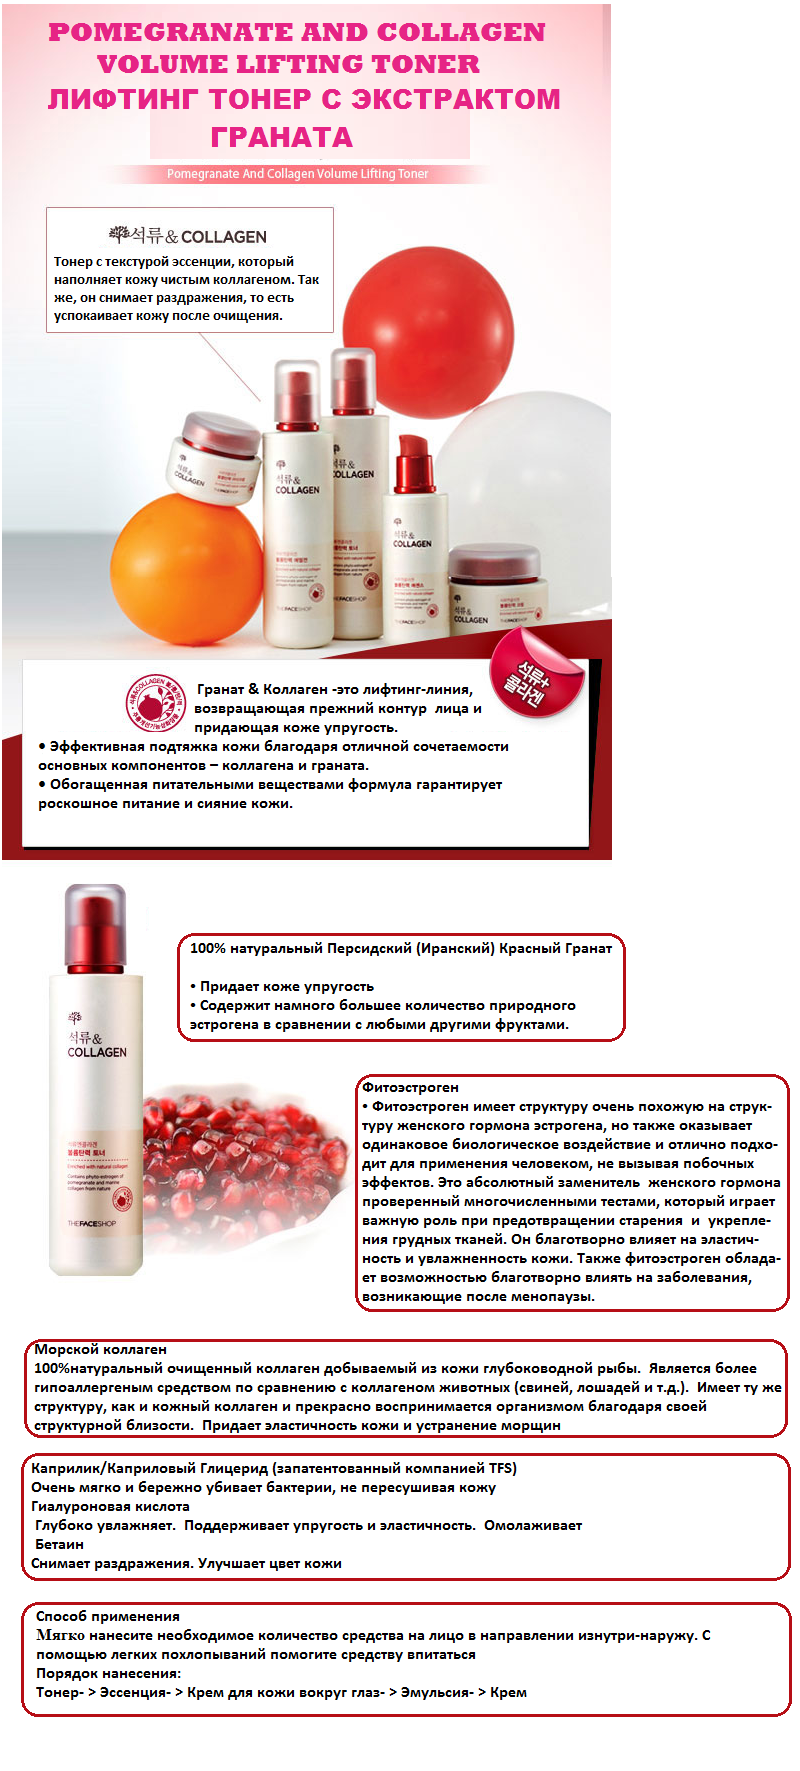 Pomegranate And Collagen Volume Lifting Toner [The Face Shop] состав